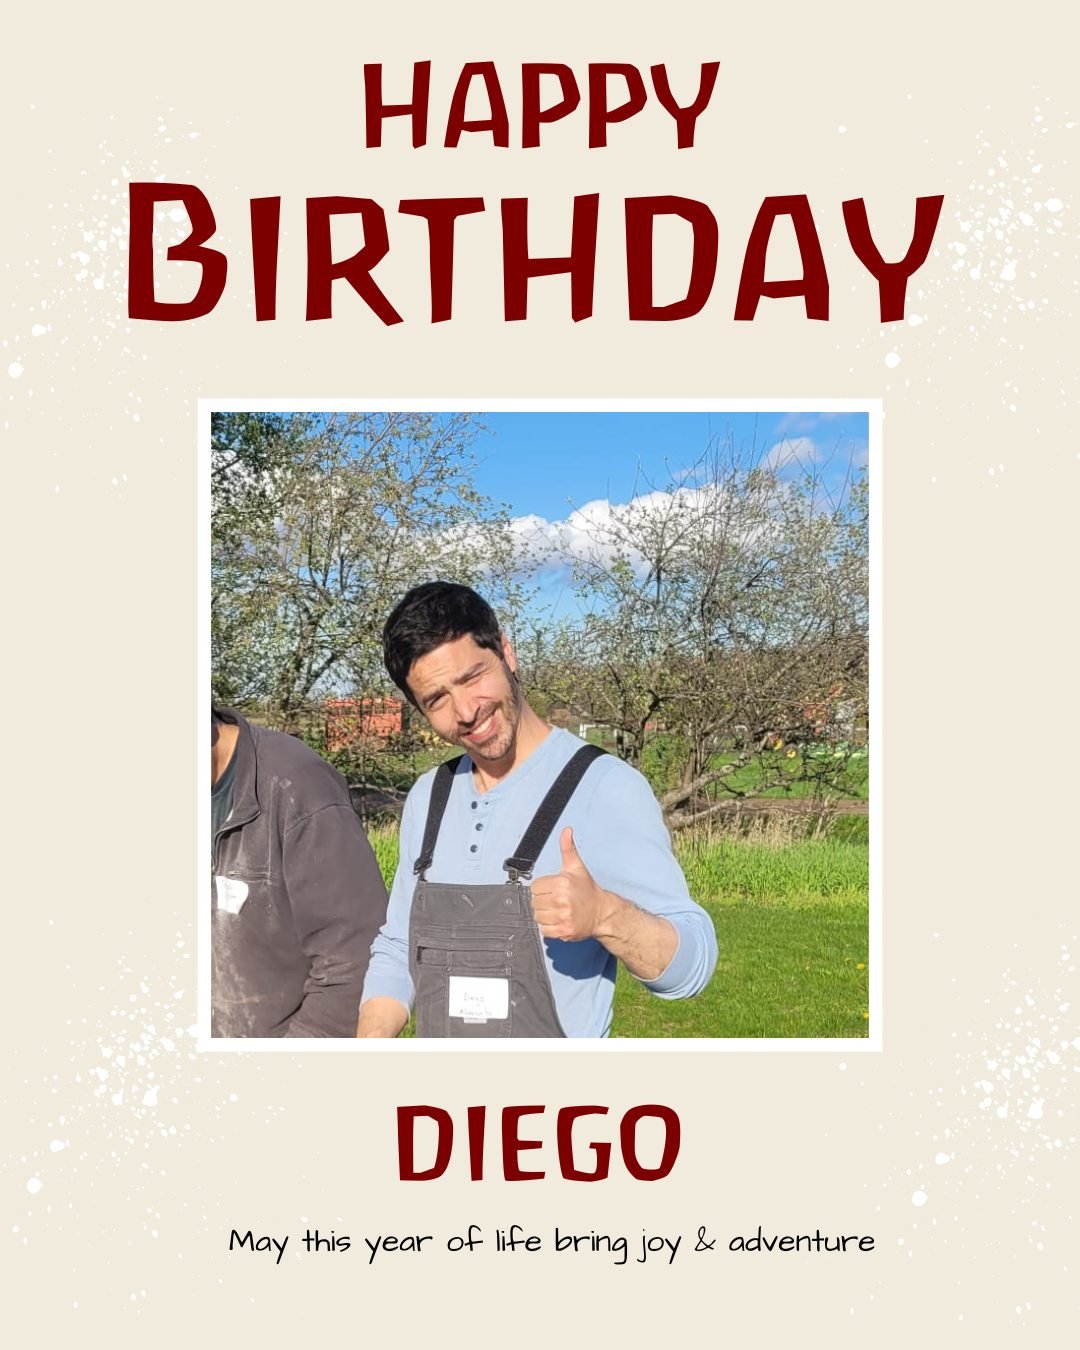 Happy Birthday Diego! (yesterday)
A week full of birthdays! 

We hope it was a wonderful day, embracing this next year of life!